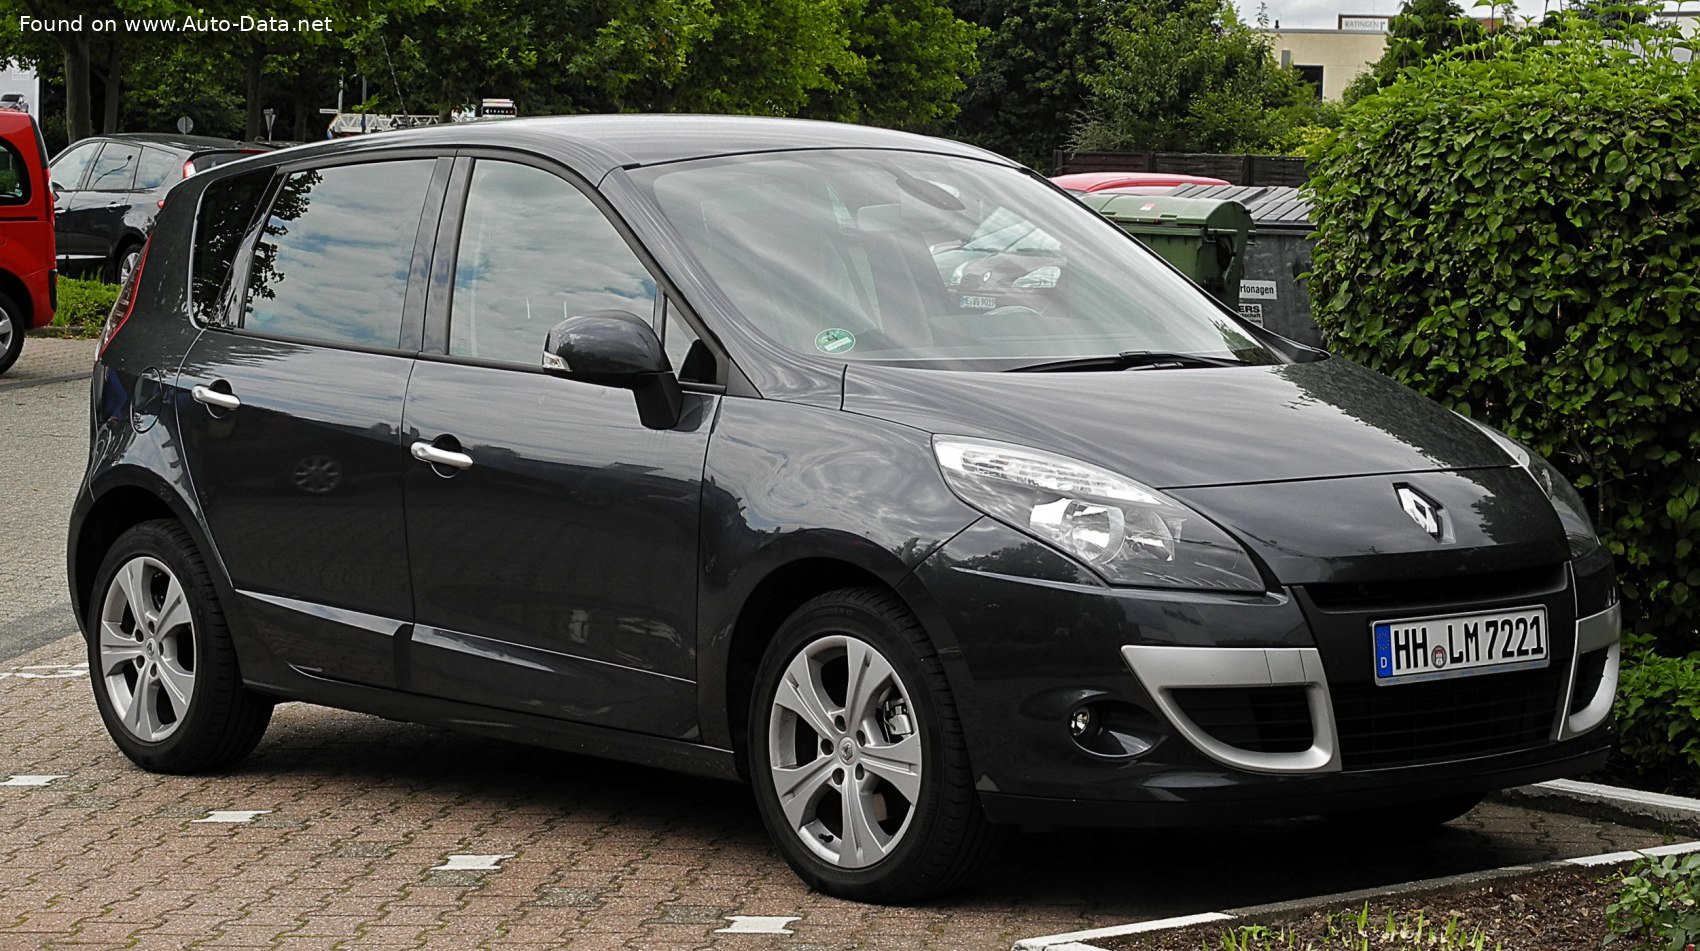 2009 Renault Scenic III (Phase I) 1.5 dCi (110 PS) FAP